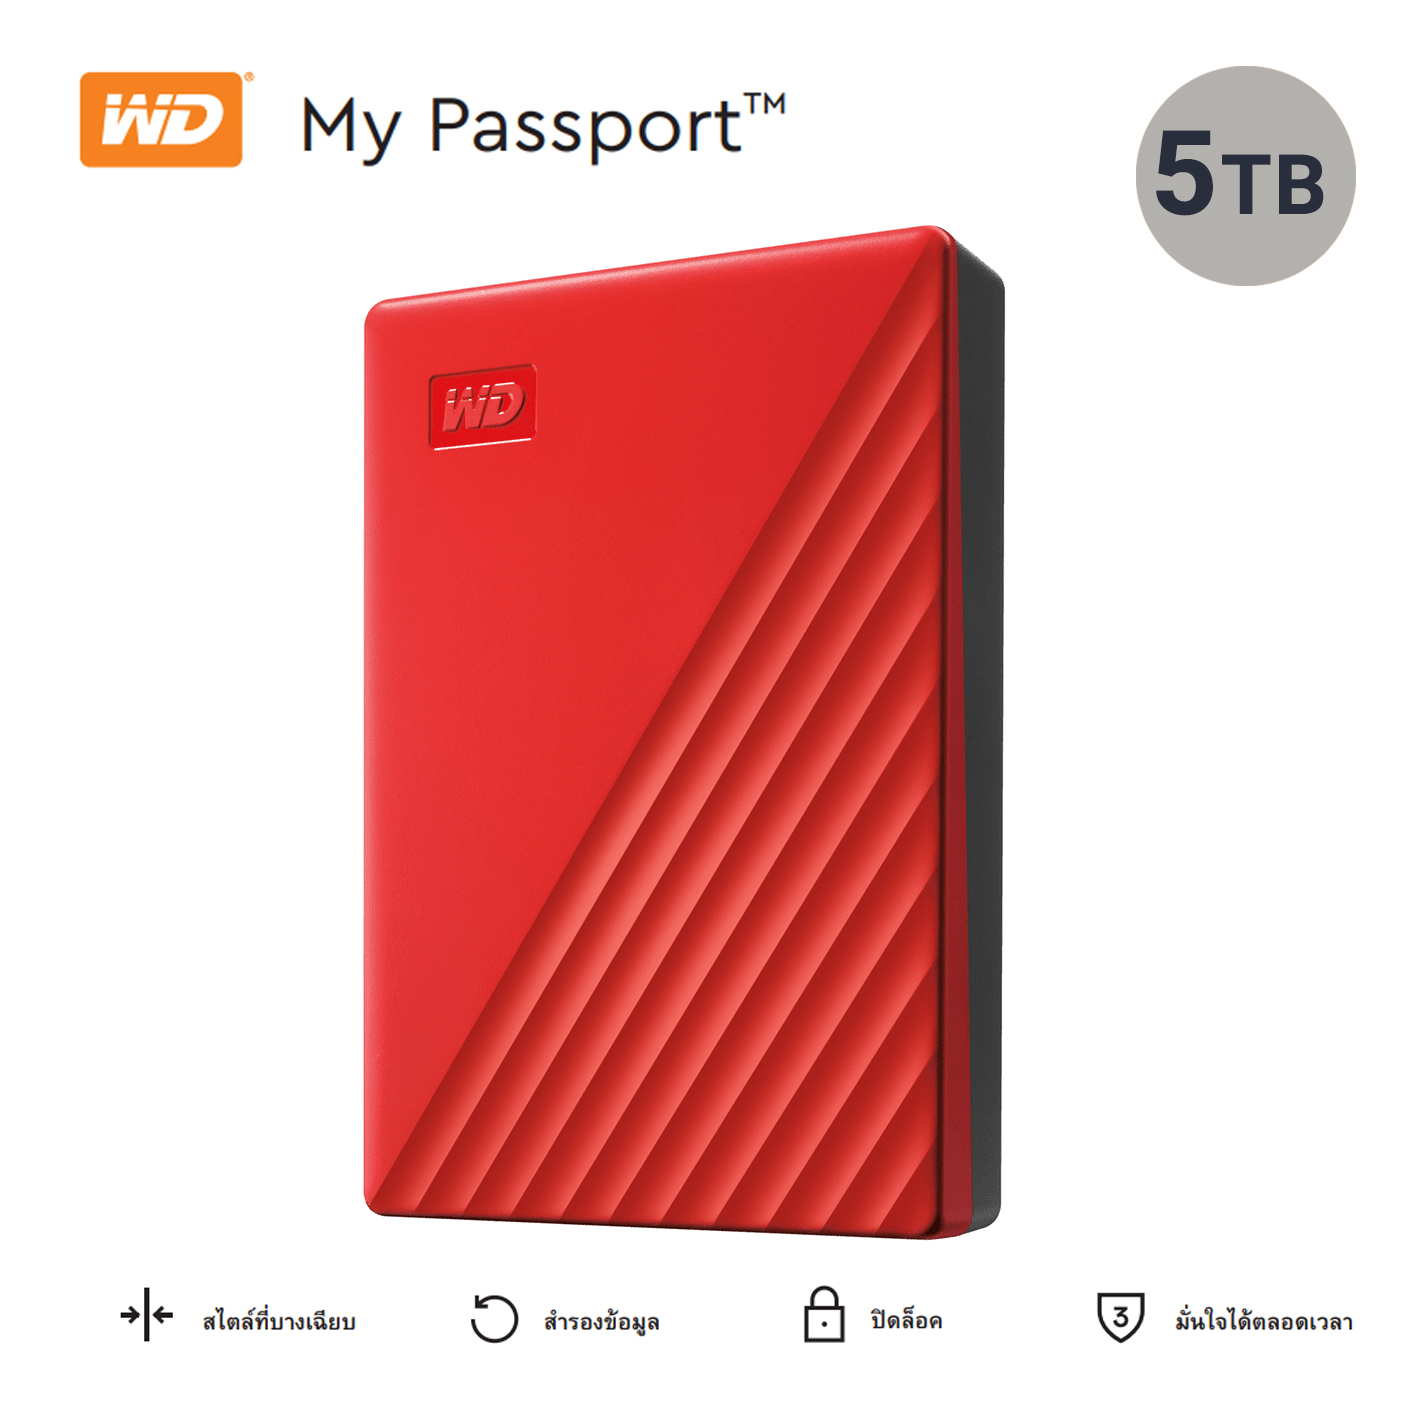 wd my passport unlock shows but not the drive